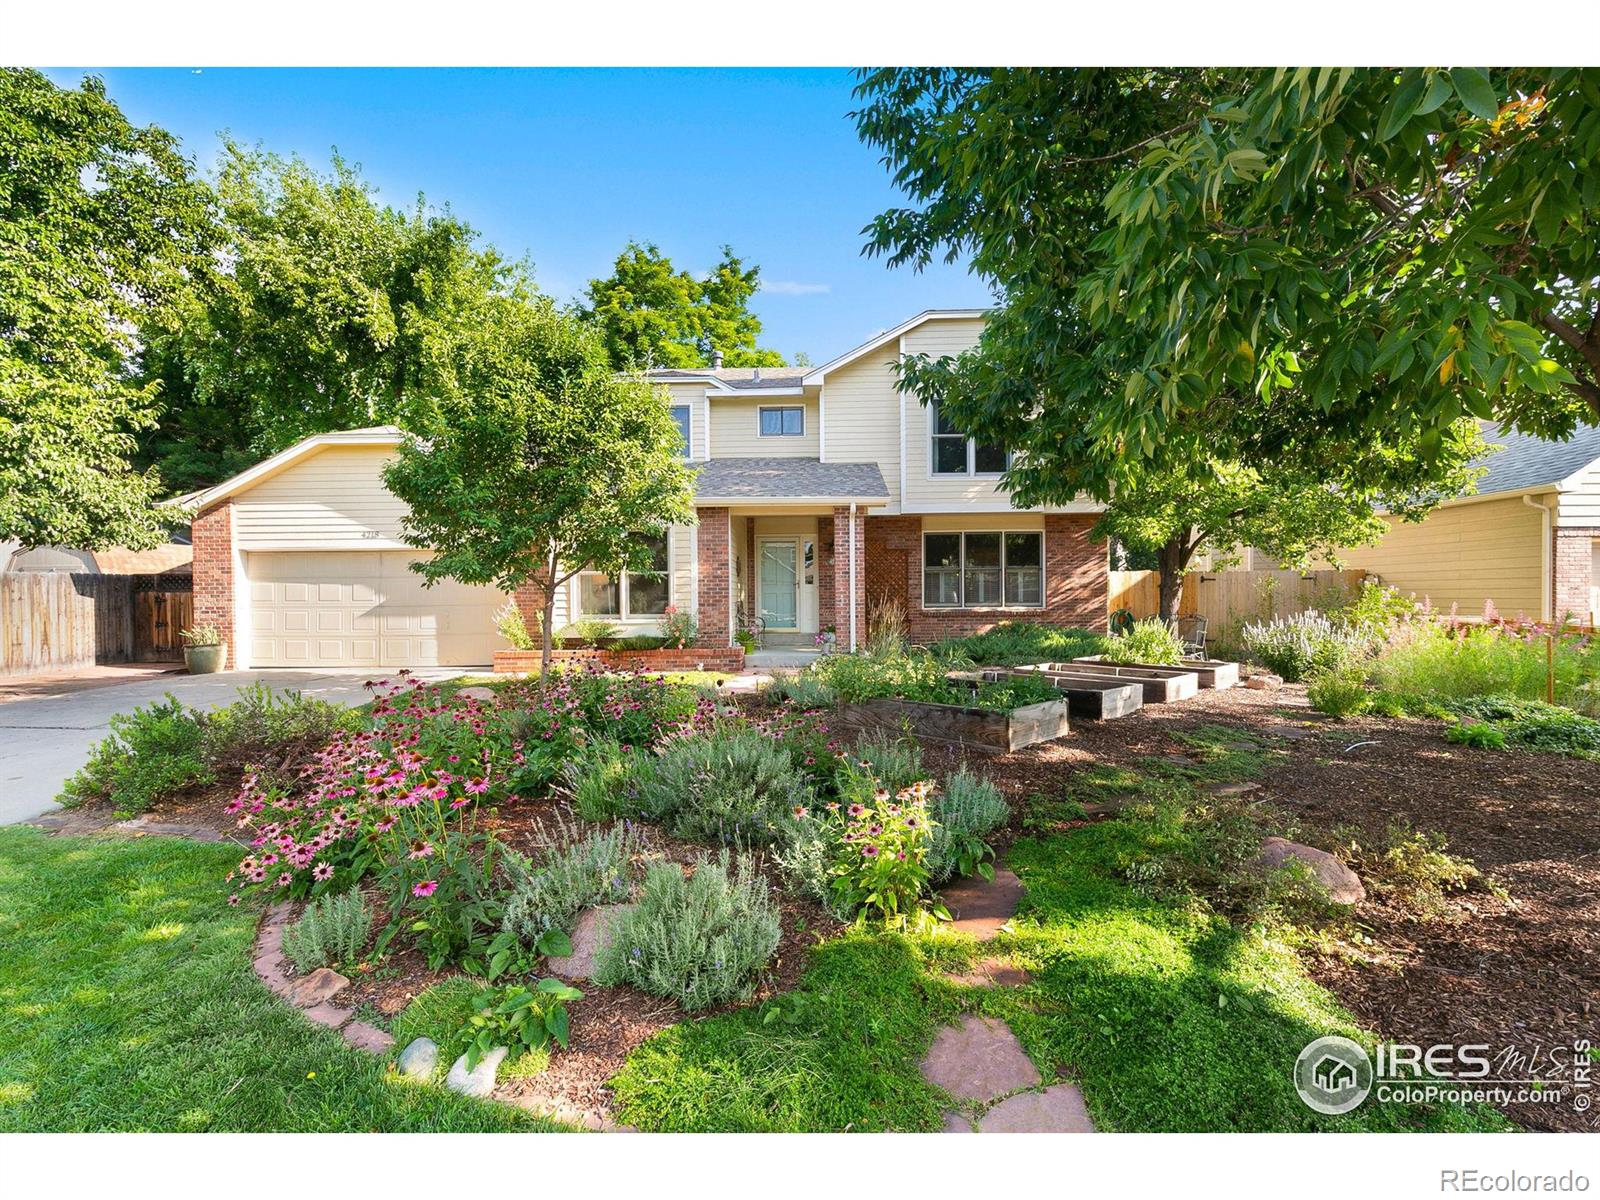 4218  Cape Cod Circle, fort collins MLS: 123456789995024 Beds: 4 Baths: 4 Price: $647,000